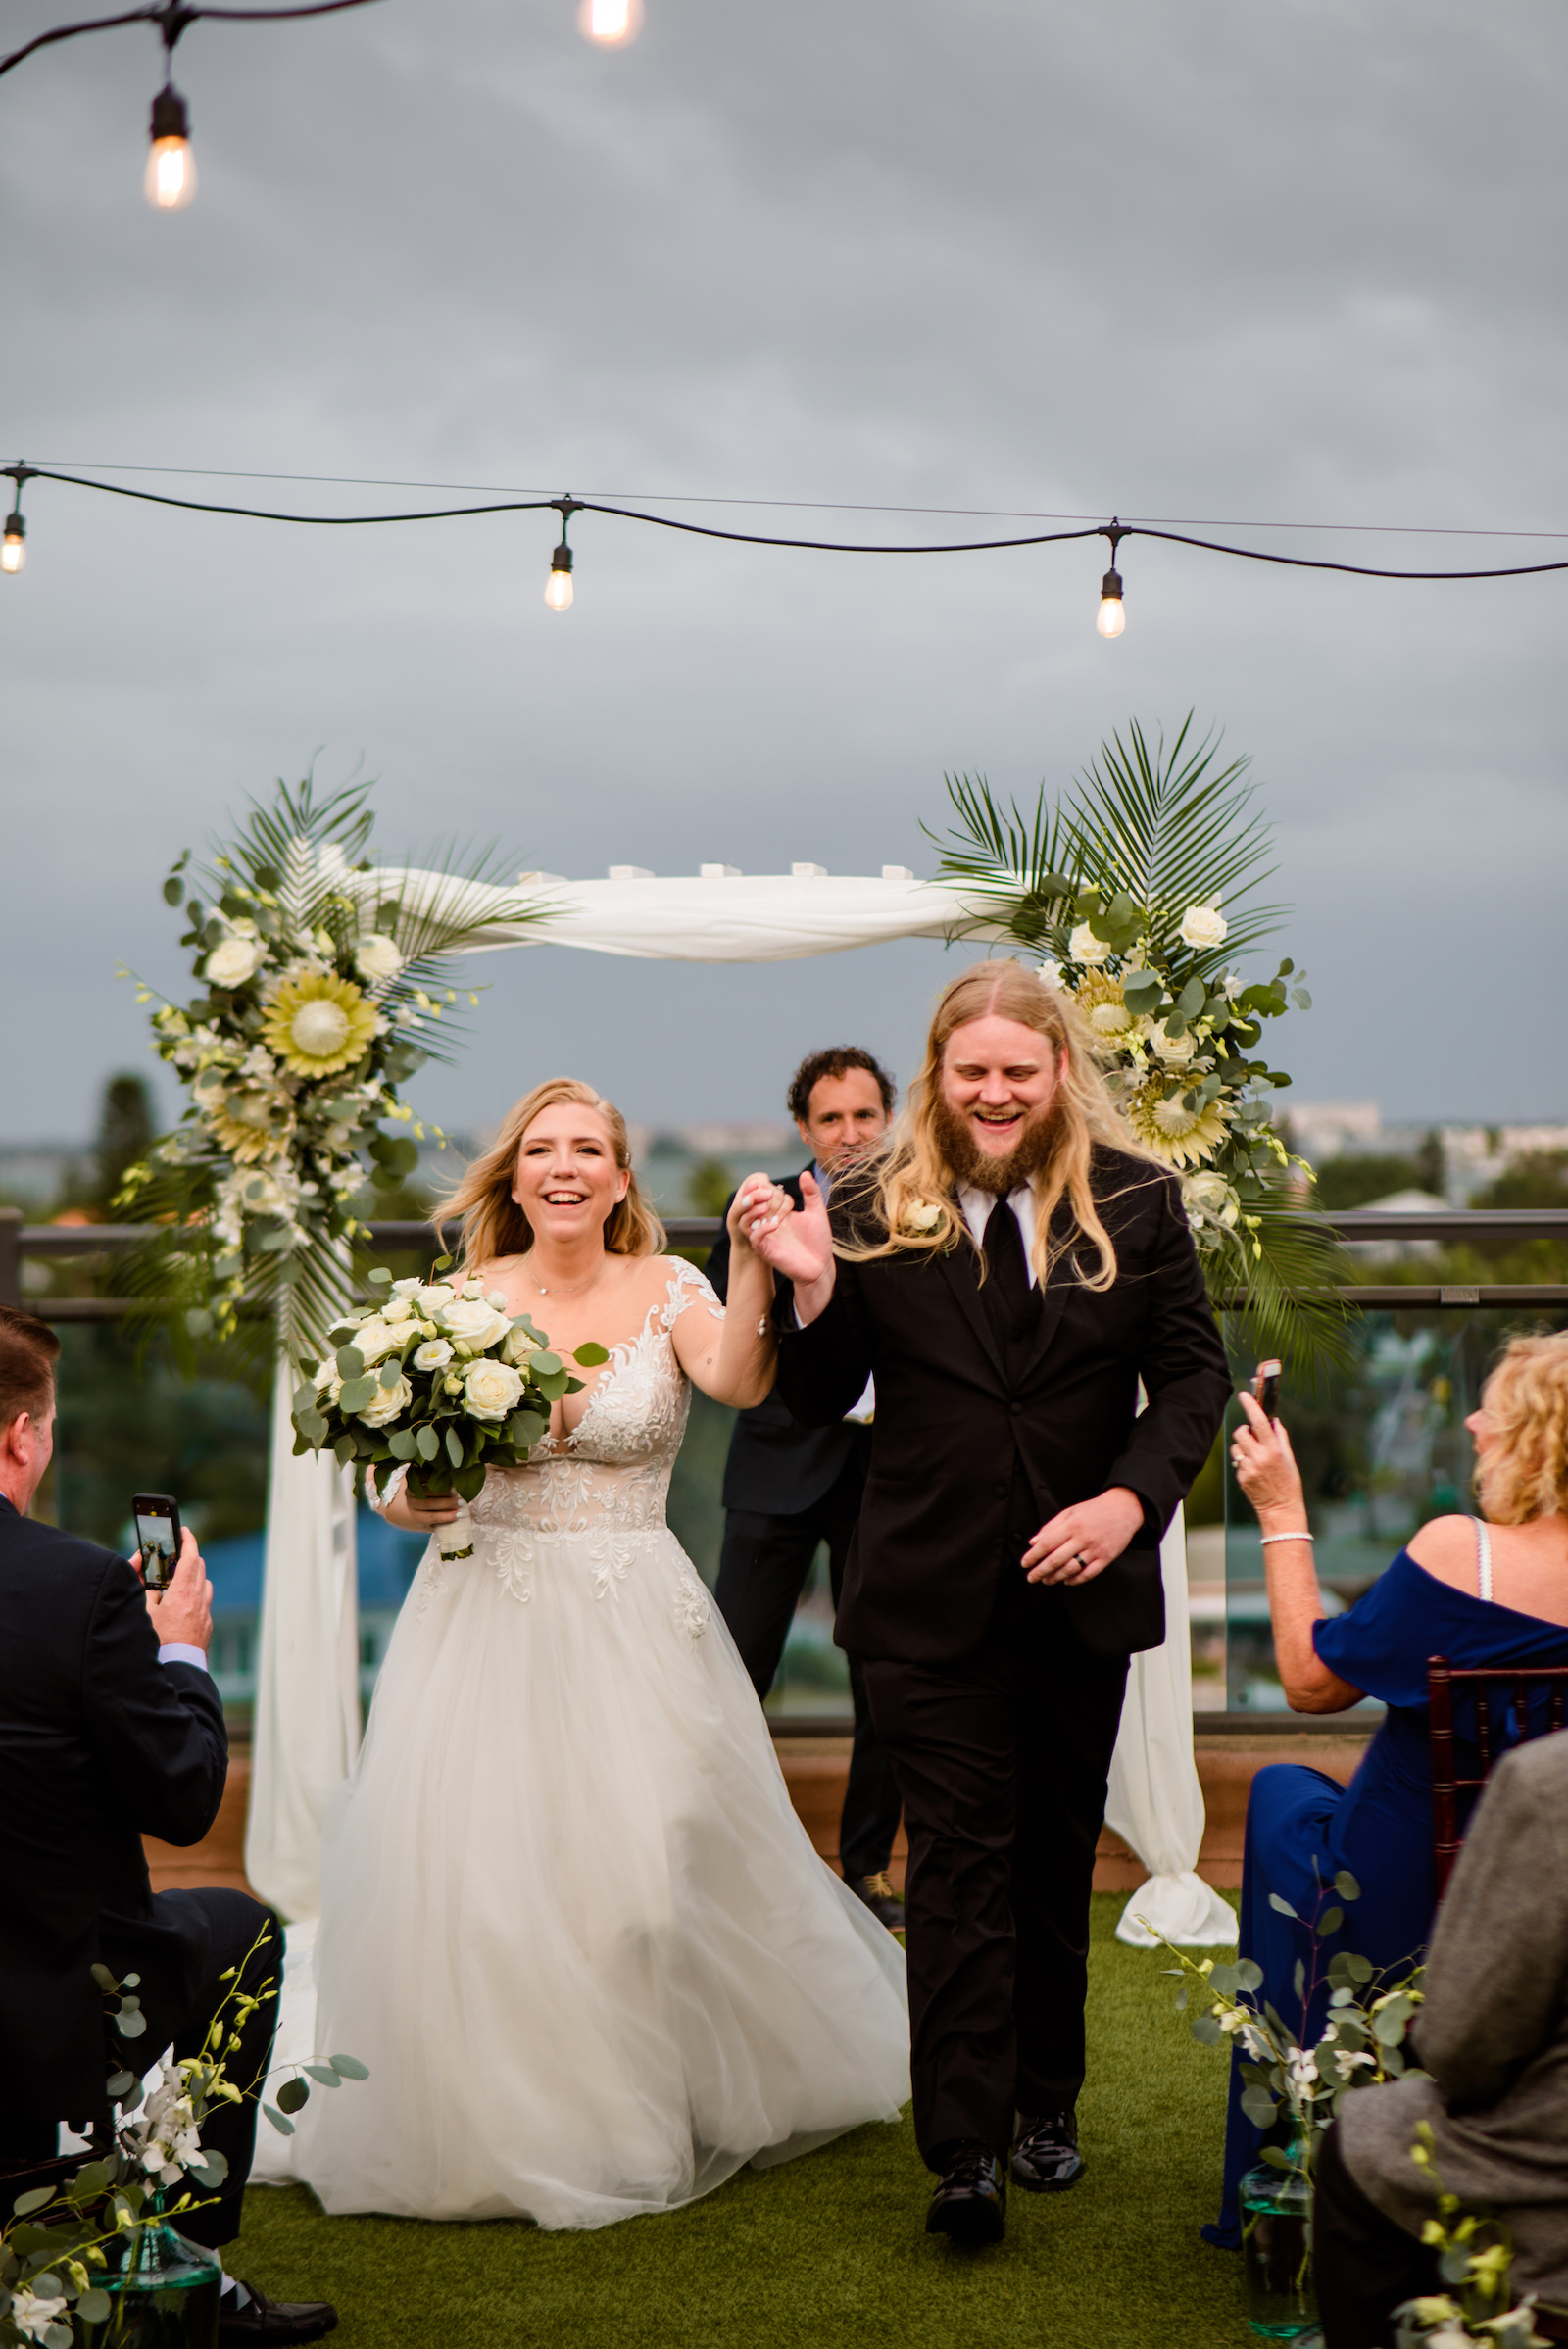 Florida Bride and Groom Wedding Ceremony Exit, Boho Neutral Tropical Wedding Ceremony Decor, Arch with Lush Floral Arrangements, Eucalyptus, King Proteas, White Florals and Palm Fronds | Tampa Bay Wedding Planner Perfecting the Plan | Wedding Florals Iza's Flowers